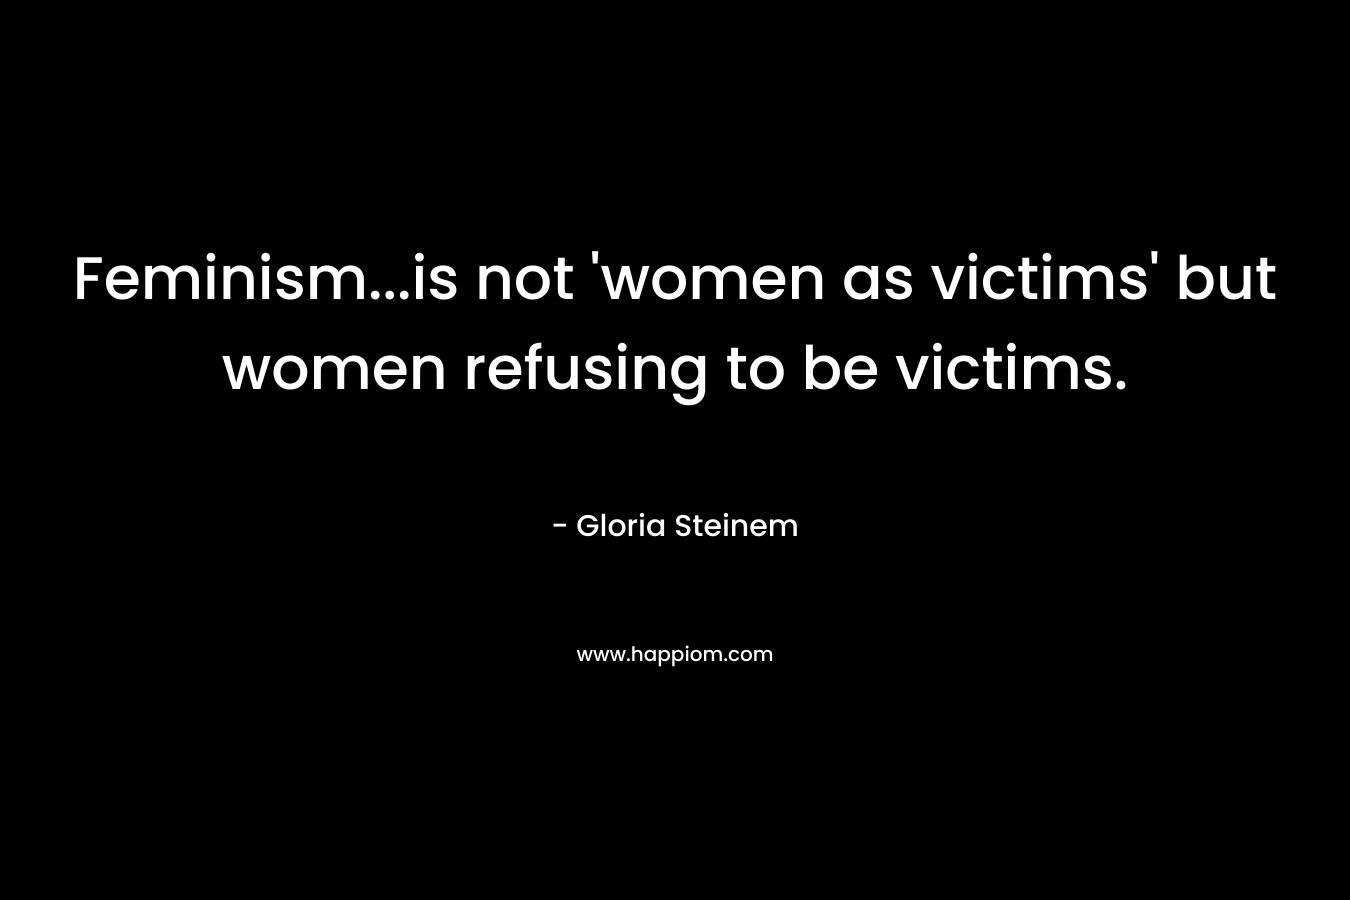 Feminism...is not 'women as victims' but women refusing to be victims.